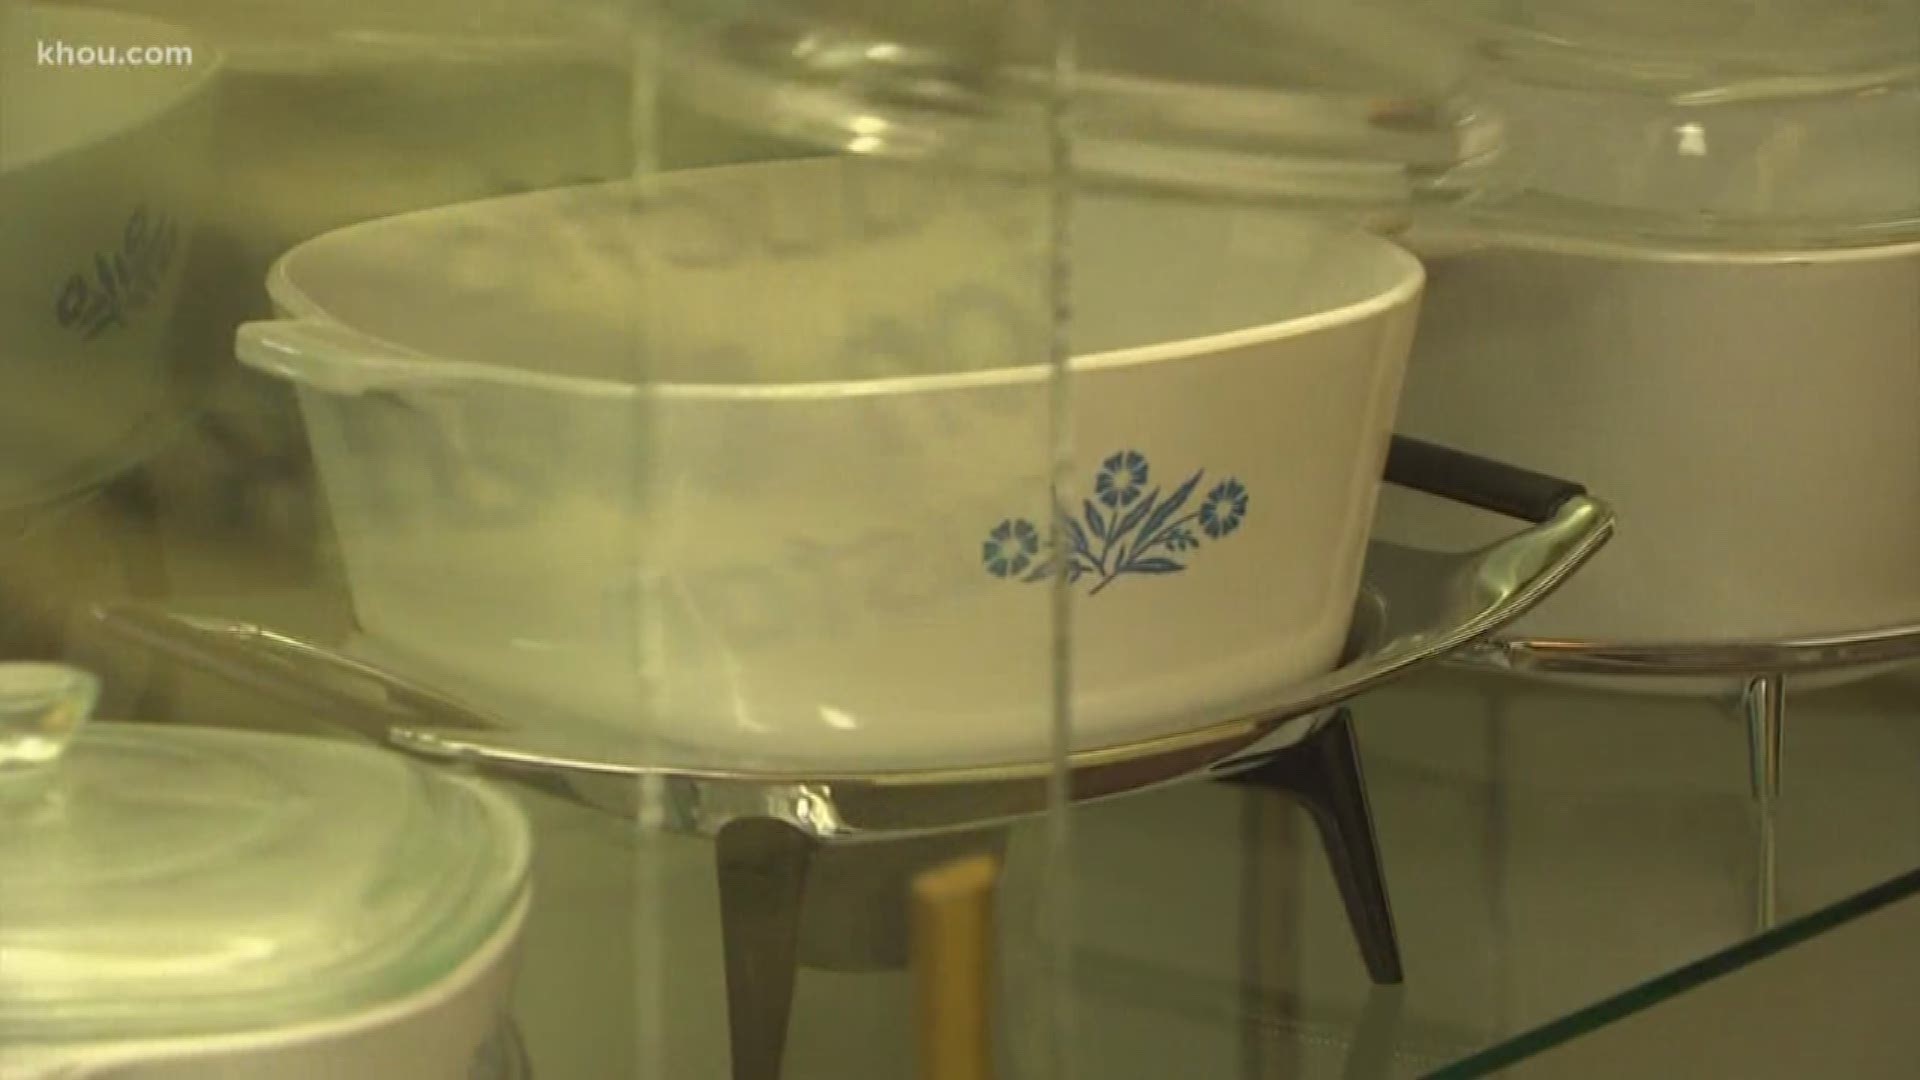 Is it true that the corningware dishes are worth thousands of dollars? Chris Rogers is here with the facts!